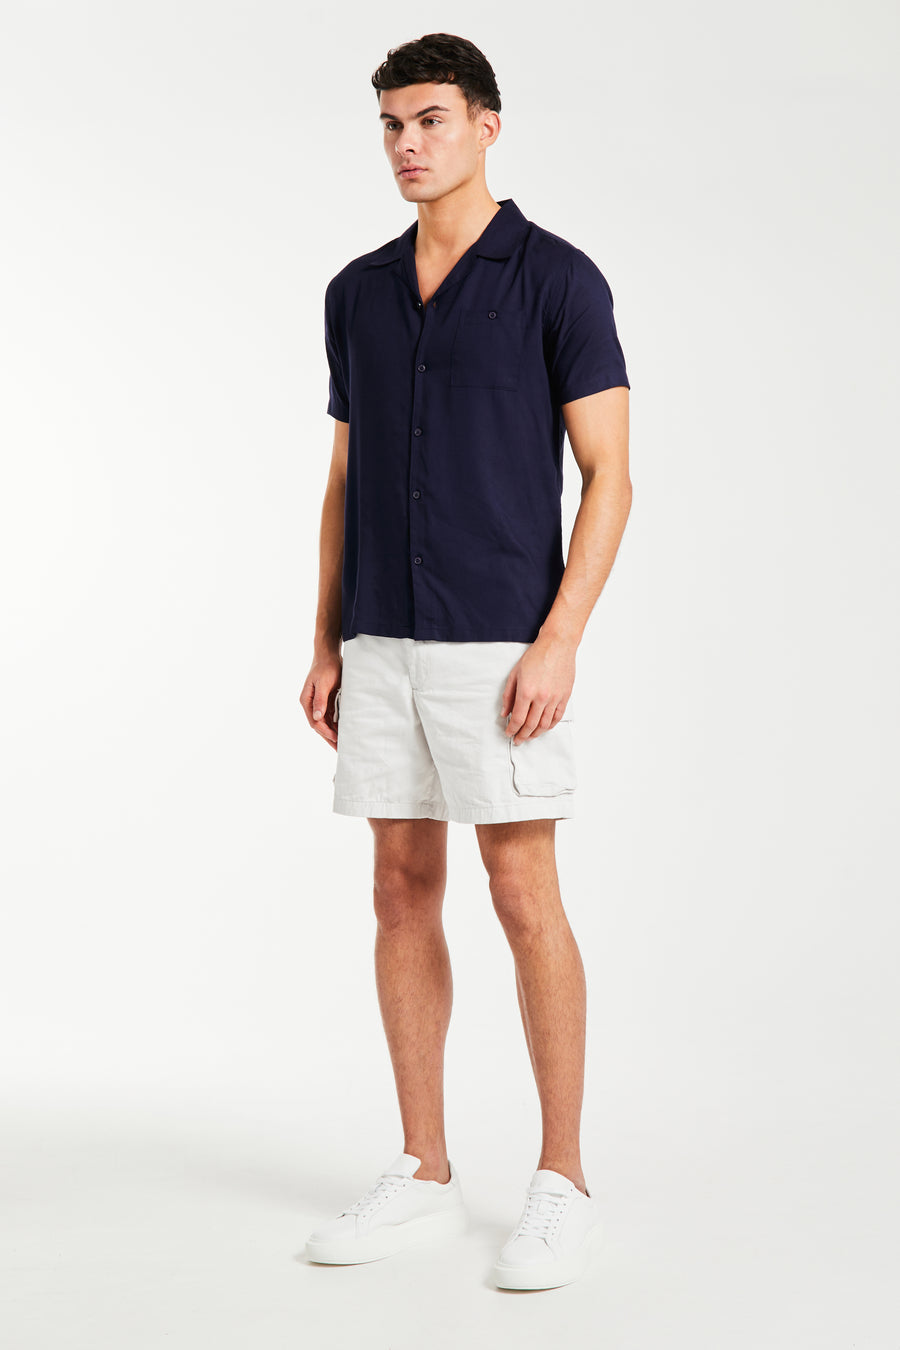 Men's shirts sale in dark blue paired with shorts